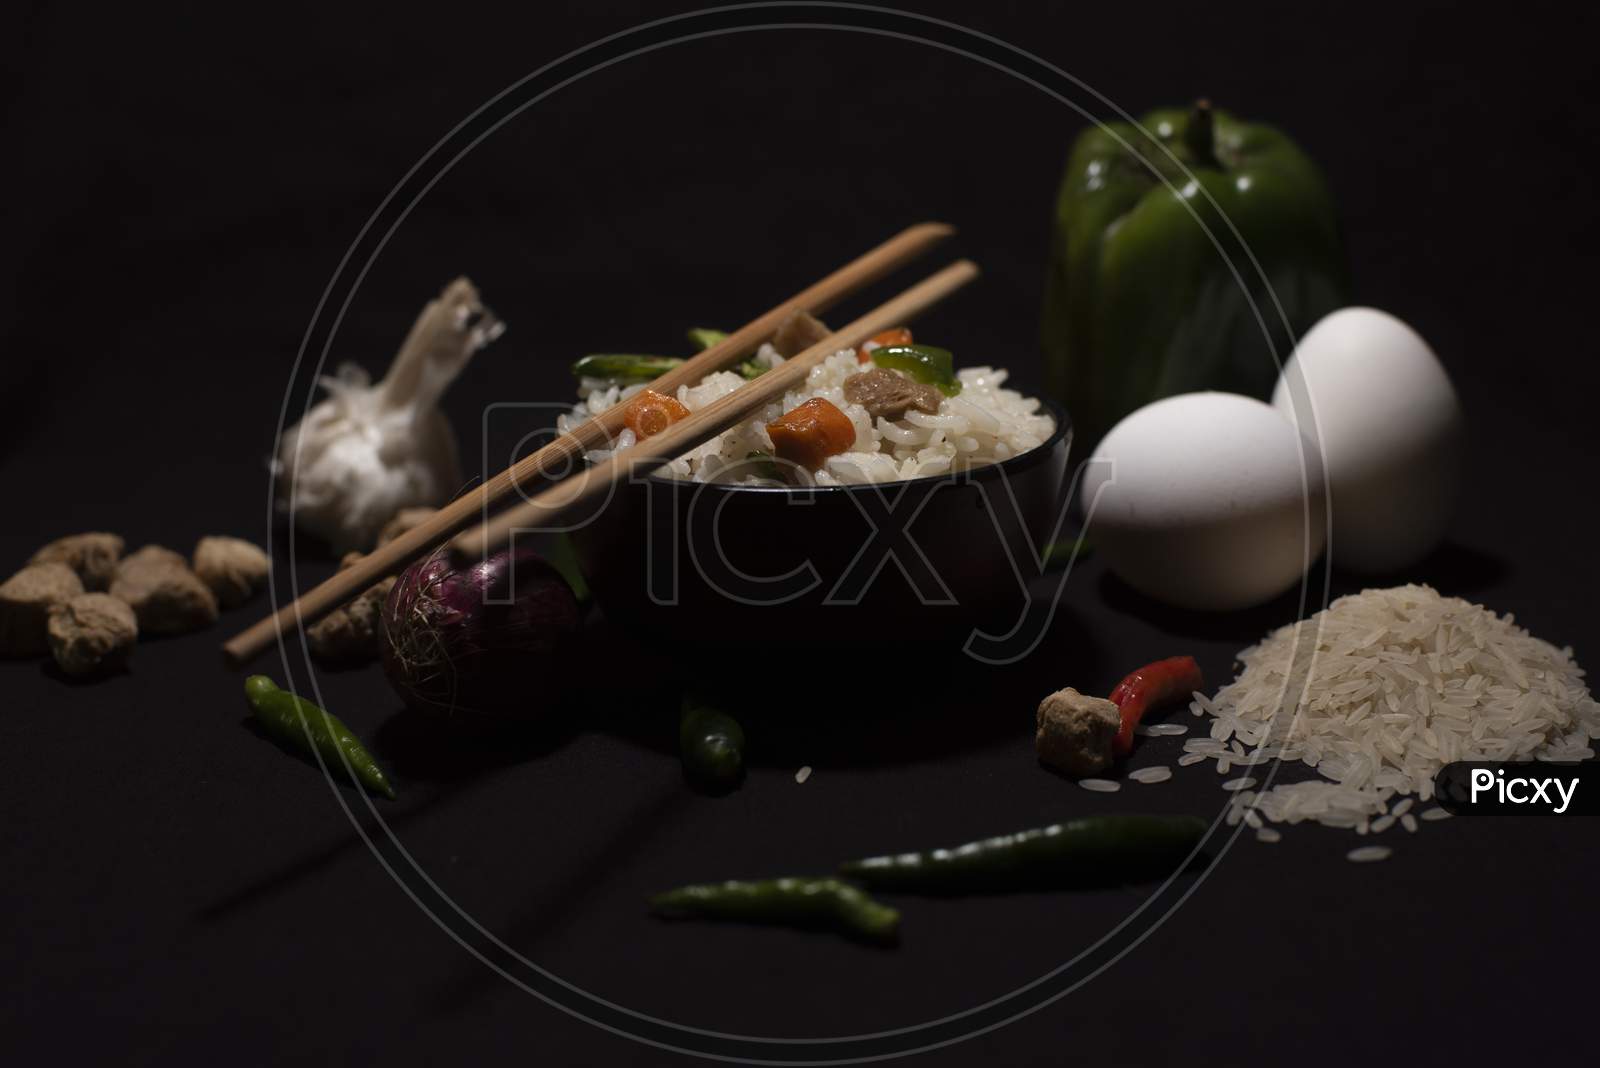 A Bowl Of A Steamed Rice And Vegetables Decorated With Veggies, Eggs, Grains, Chopsticks And Spoon In A Black Copy Space Background. Food Photography.